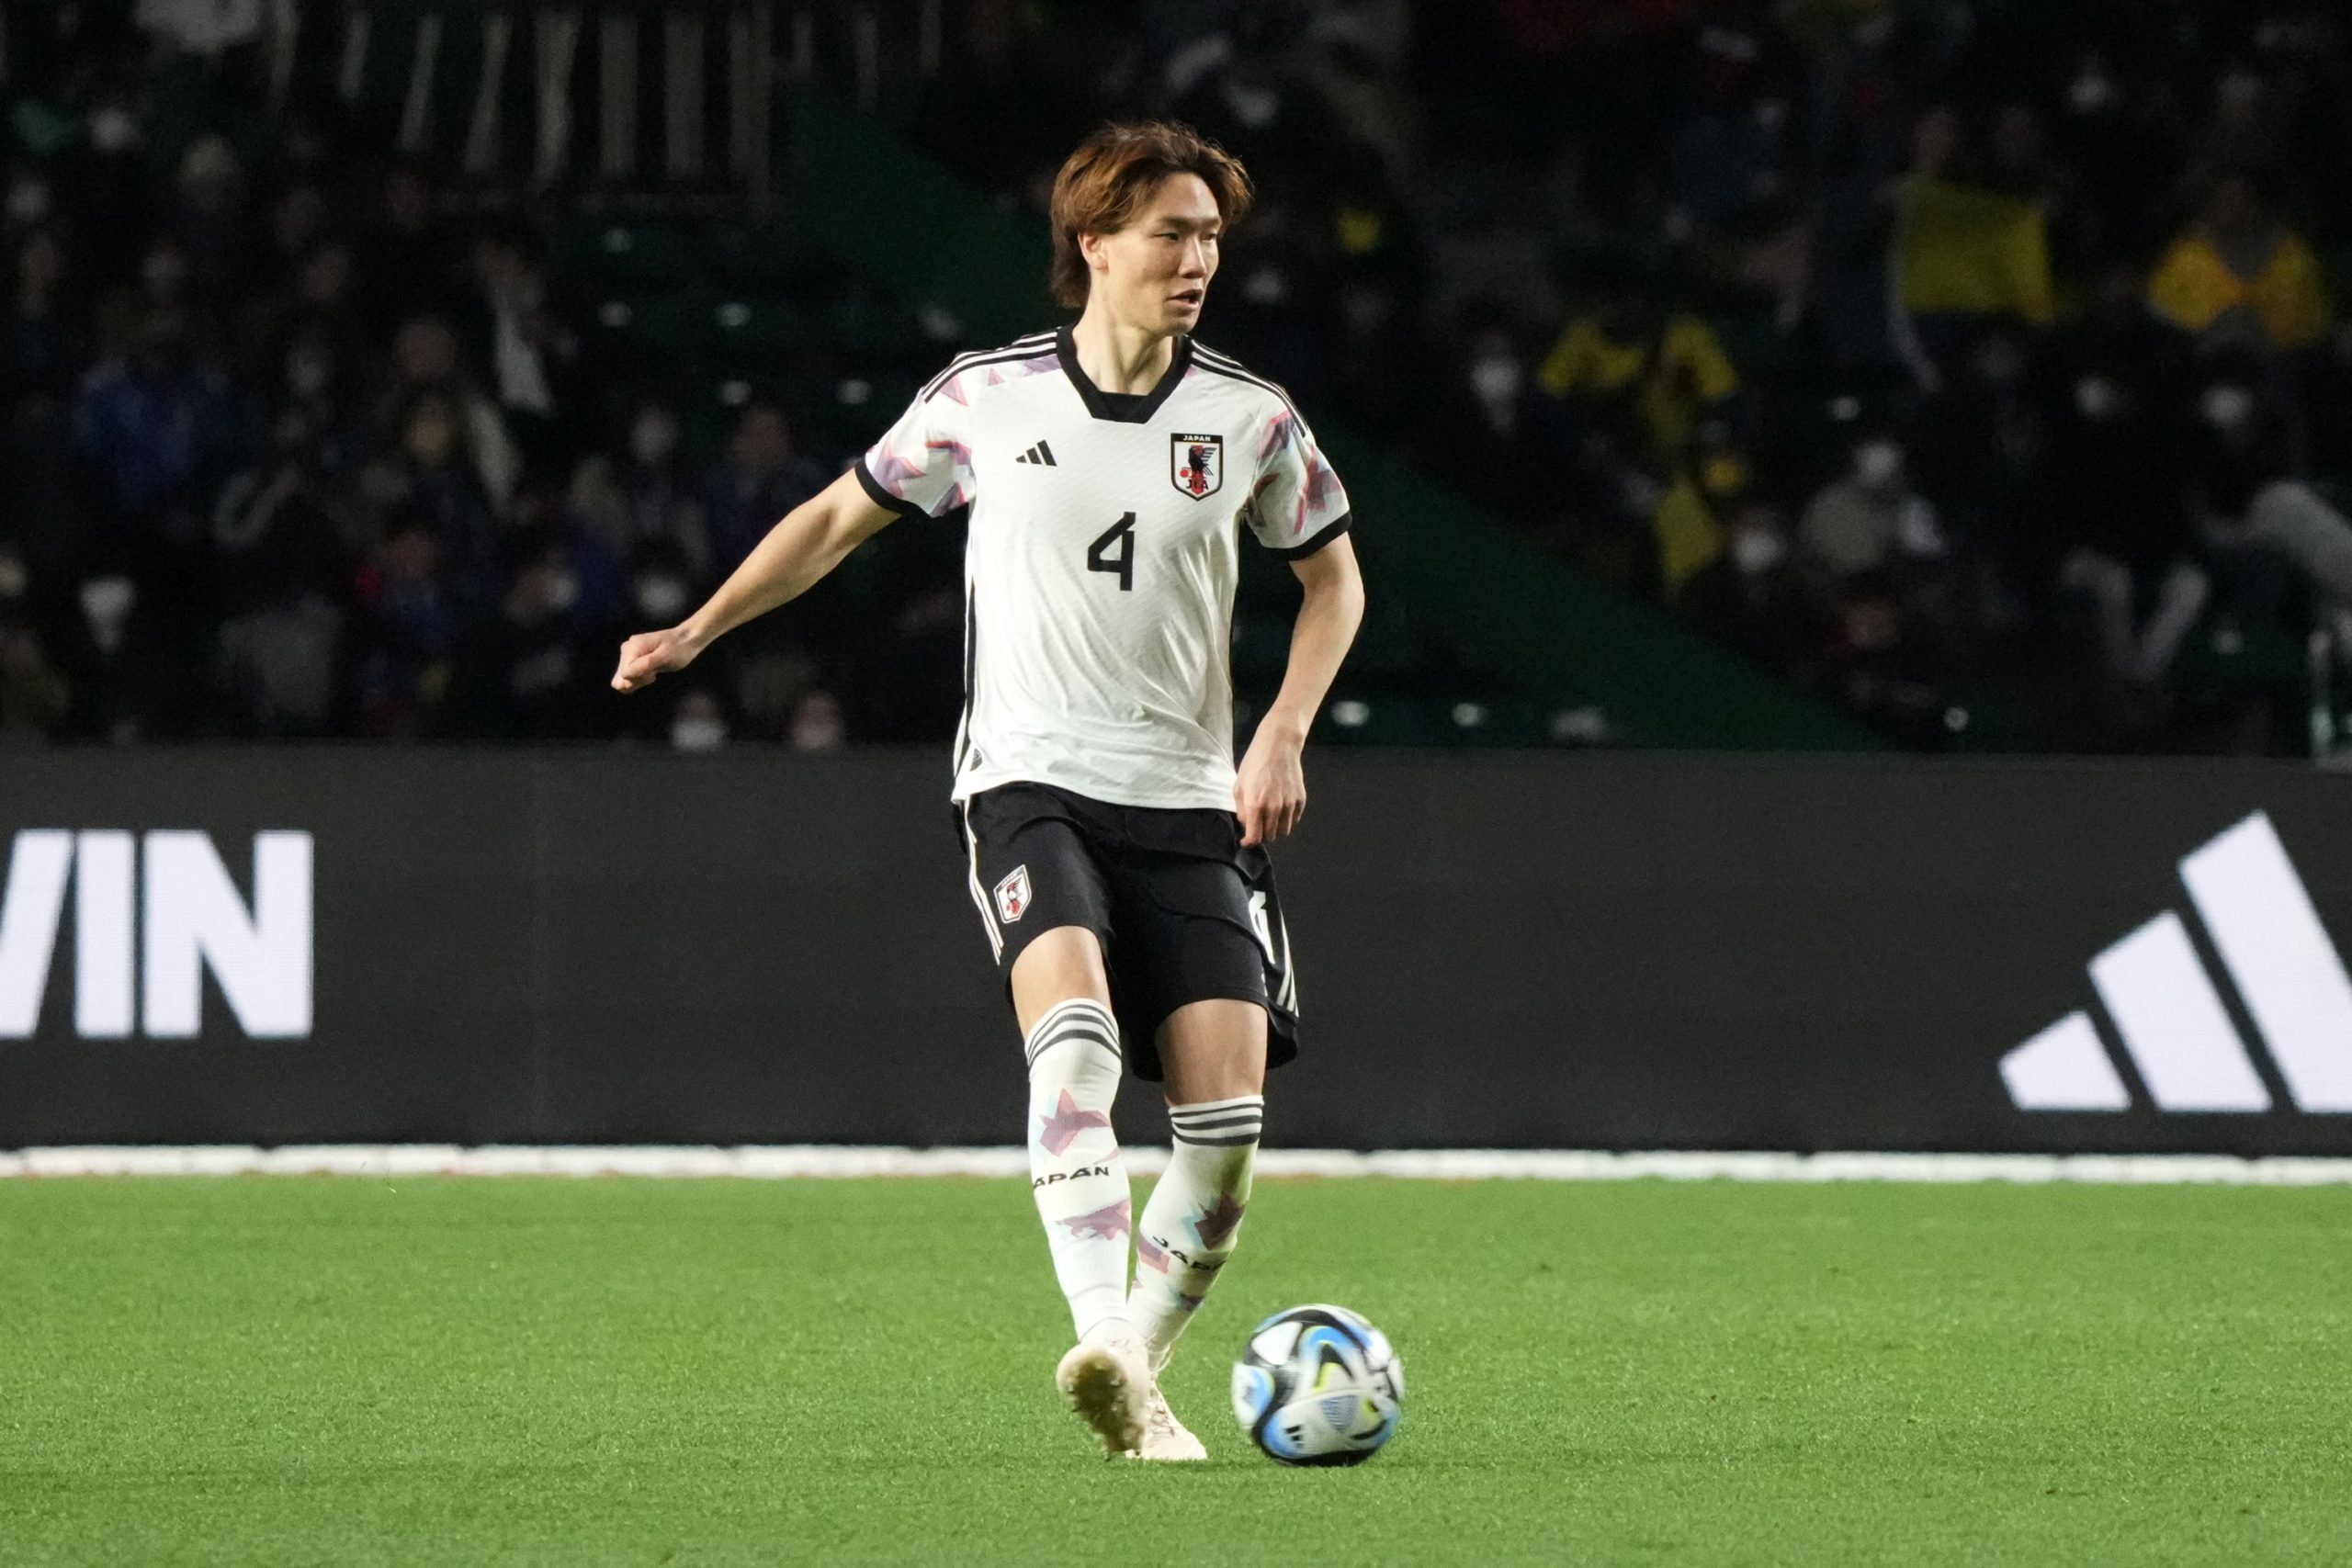 Kou Itakura of Japan in action during an international friendly against Colombia.